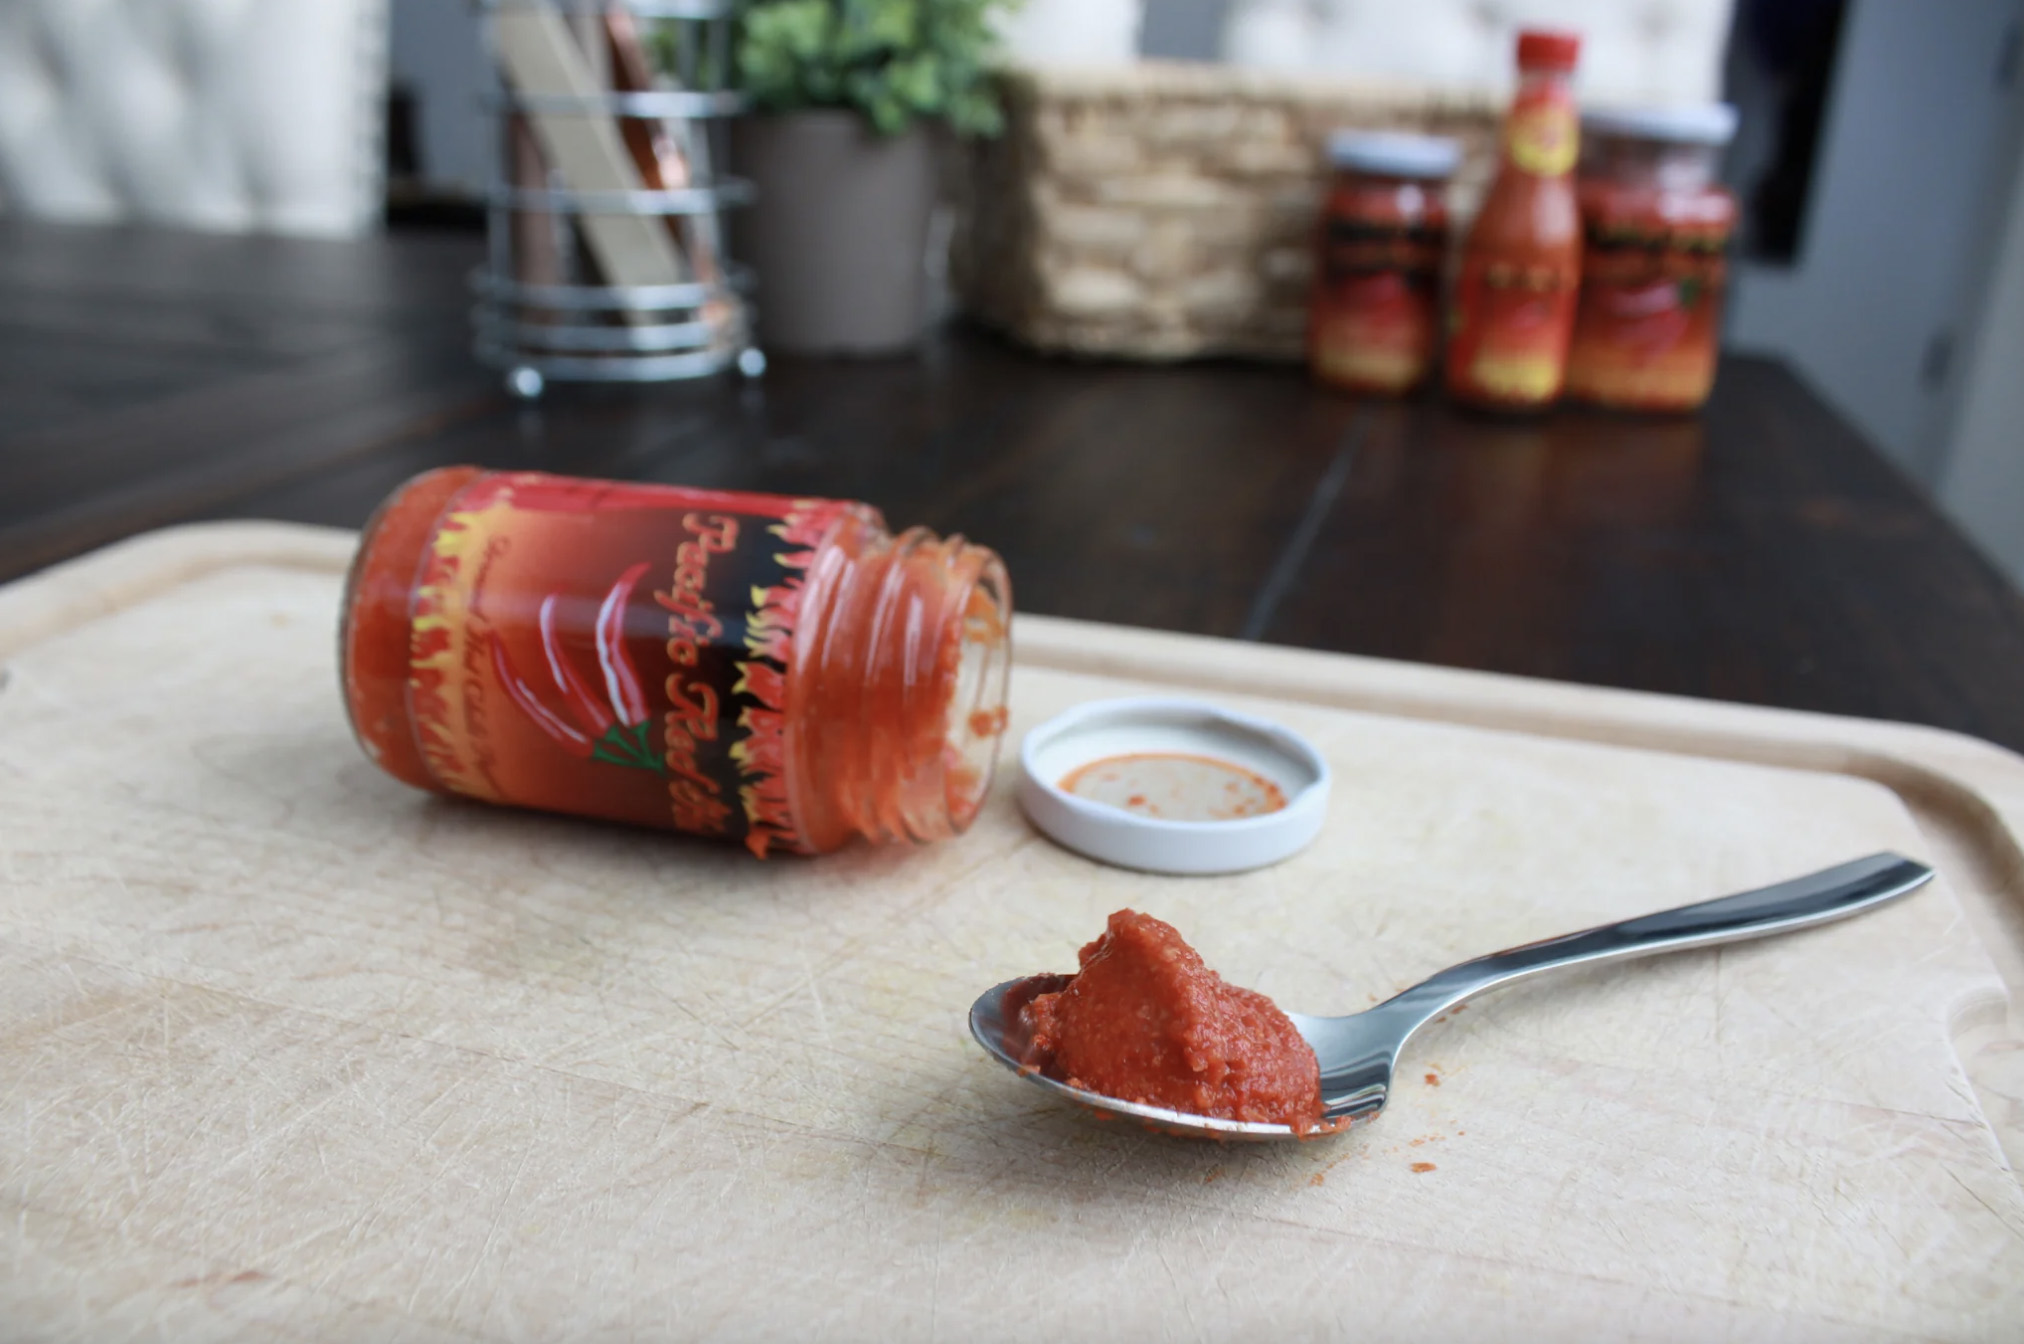 Pacific Red Hot Sauce on spoon